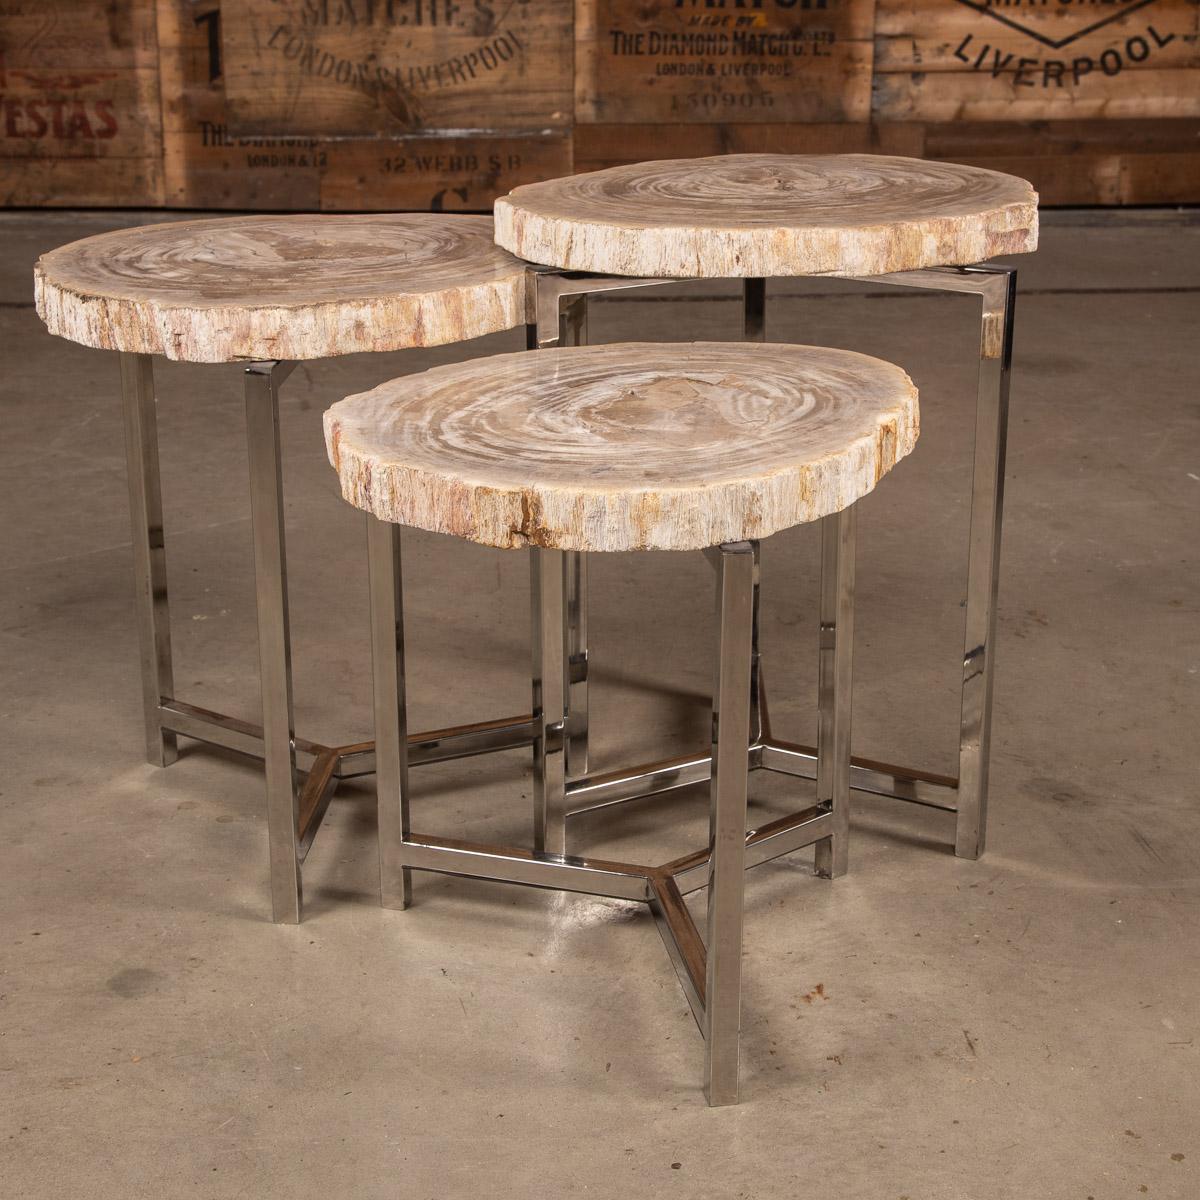 A nest of three petrified wood tables on chrome bases. These pieces have naturally formed over millions of years, keeping the natural edge and polishing the center to a high gloss, shows the fossil at it's best. Each piece of naturally formed stone